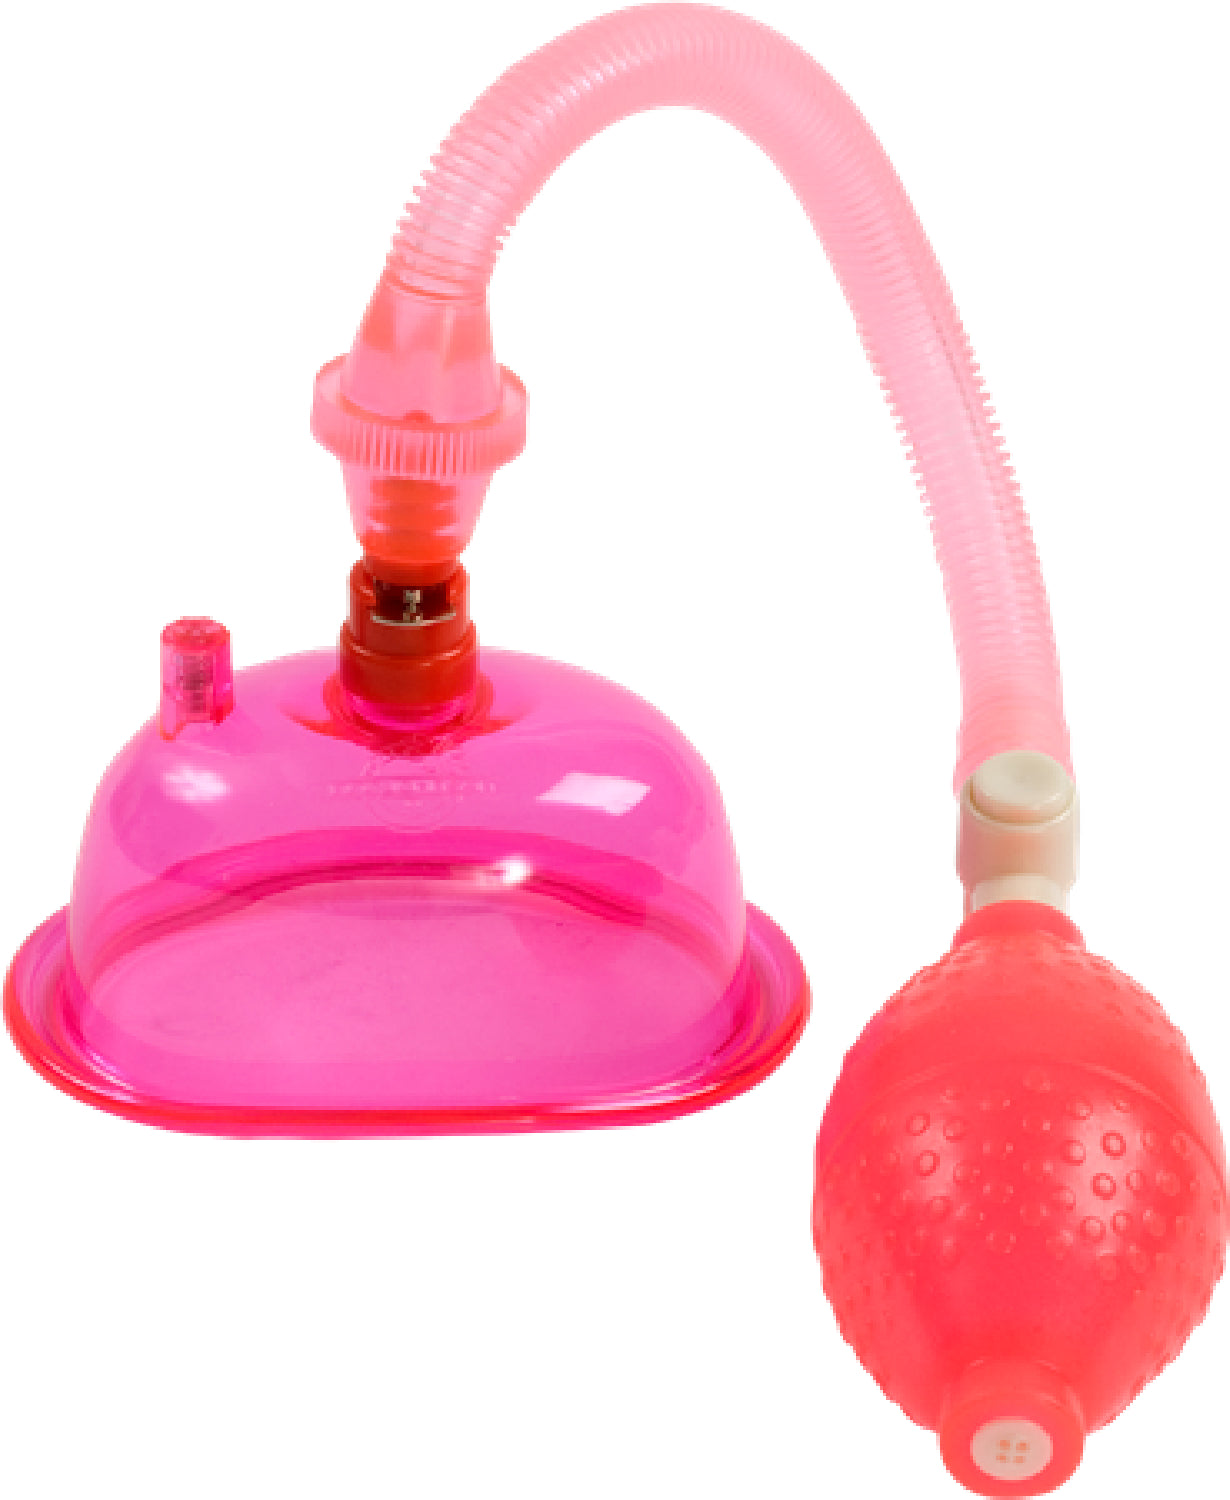 Pussy Pump (Pink) - One Stop Adult Shop